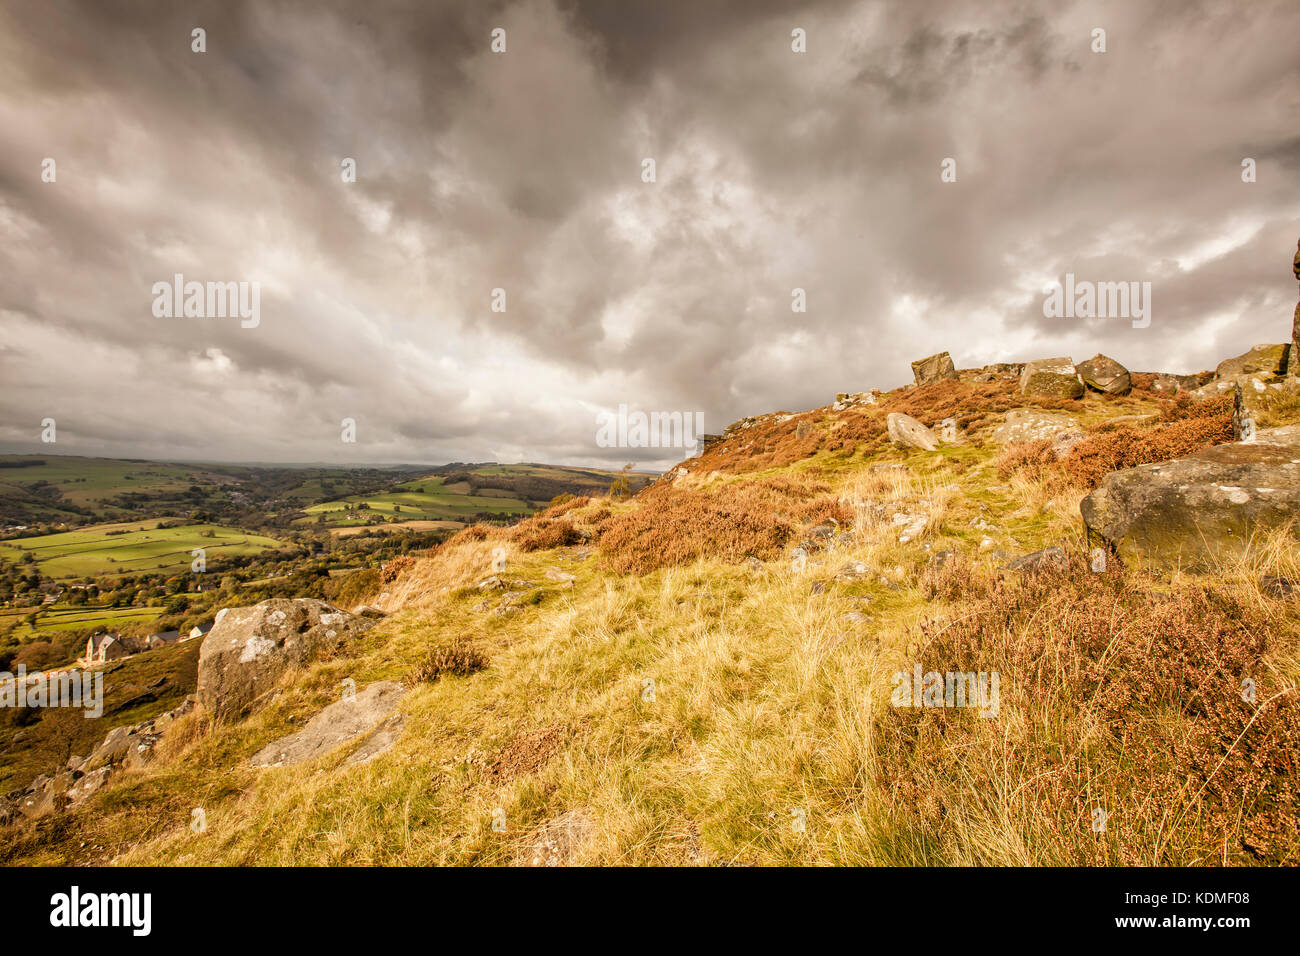 Scenic views from Curbar Edge,Peak District National Park, Derbyshire,England Stock Photo